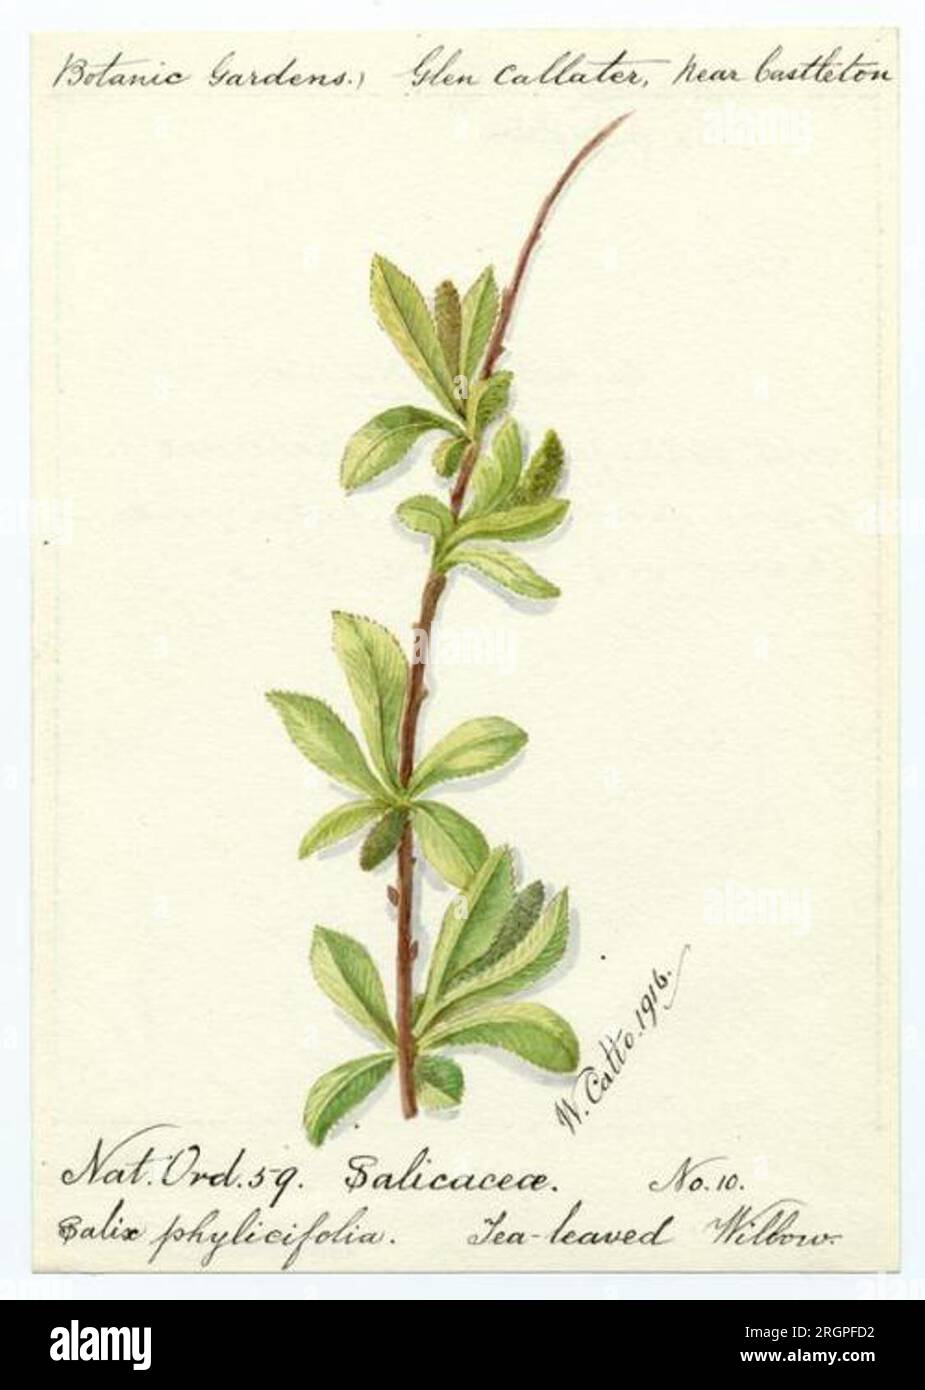 Tea-leaved willow (salix phylicifolia) - William Catto 1916 by William Catto Stock Photo